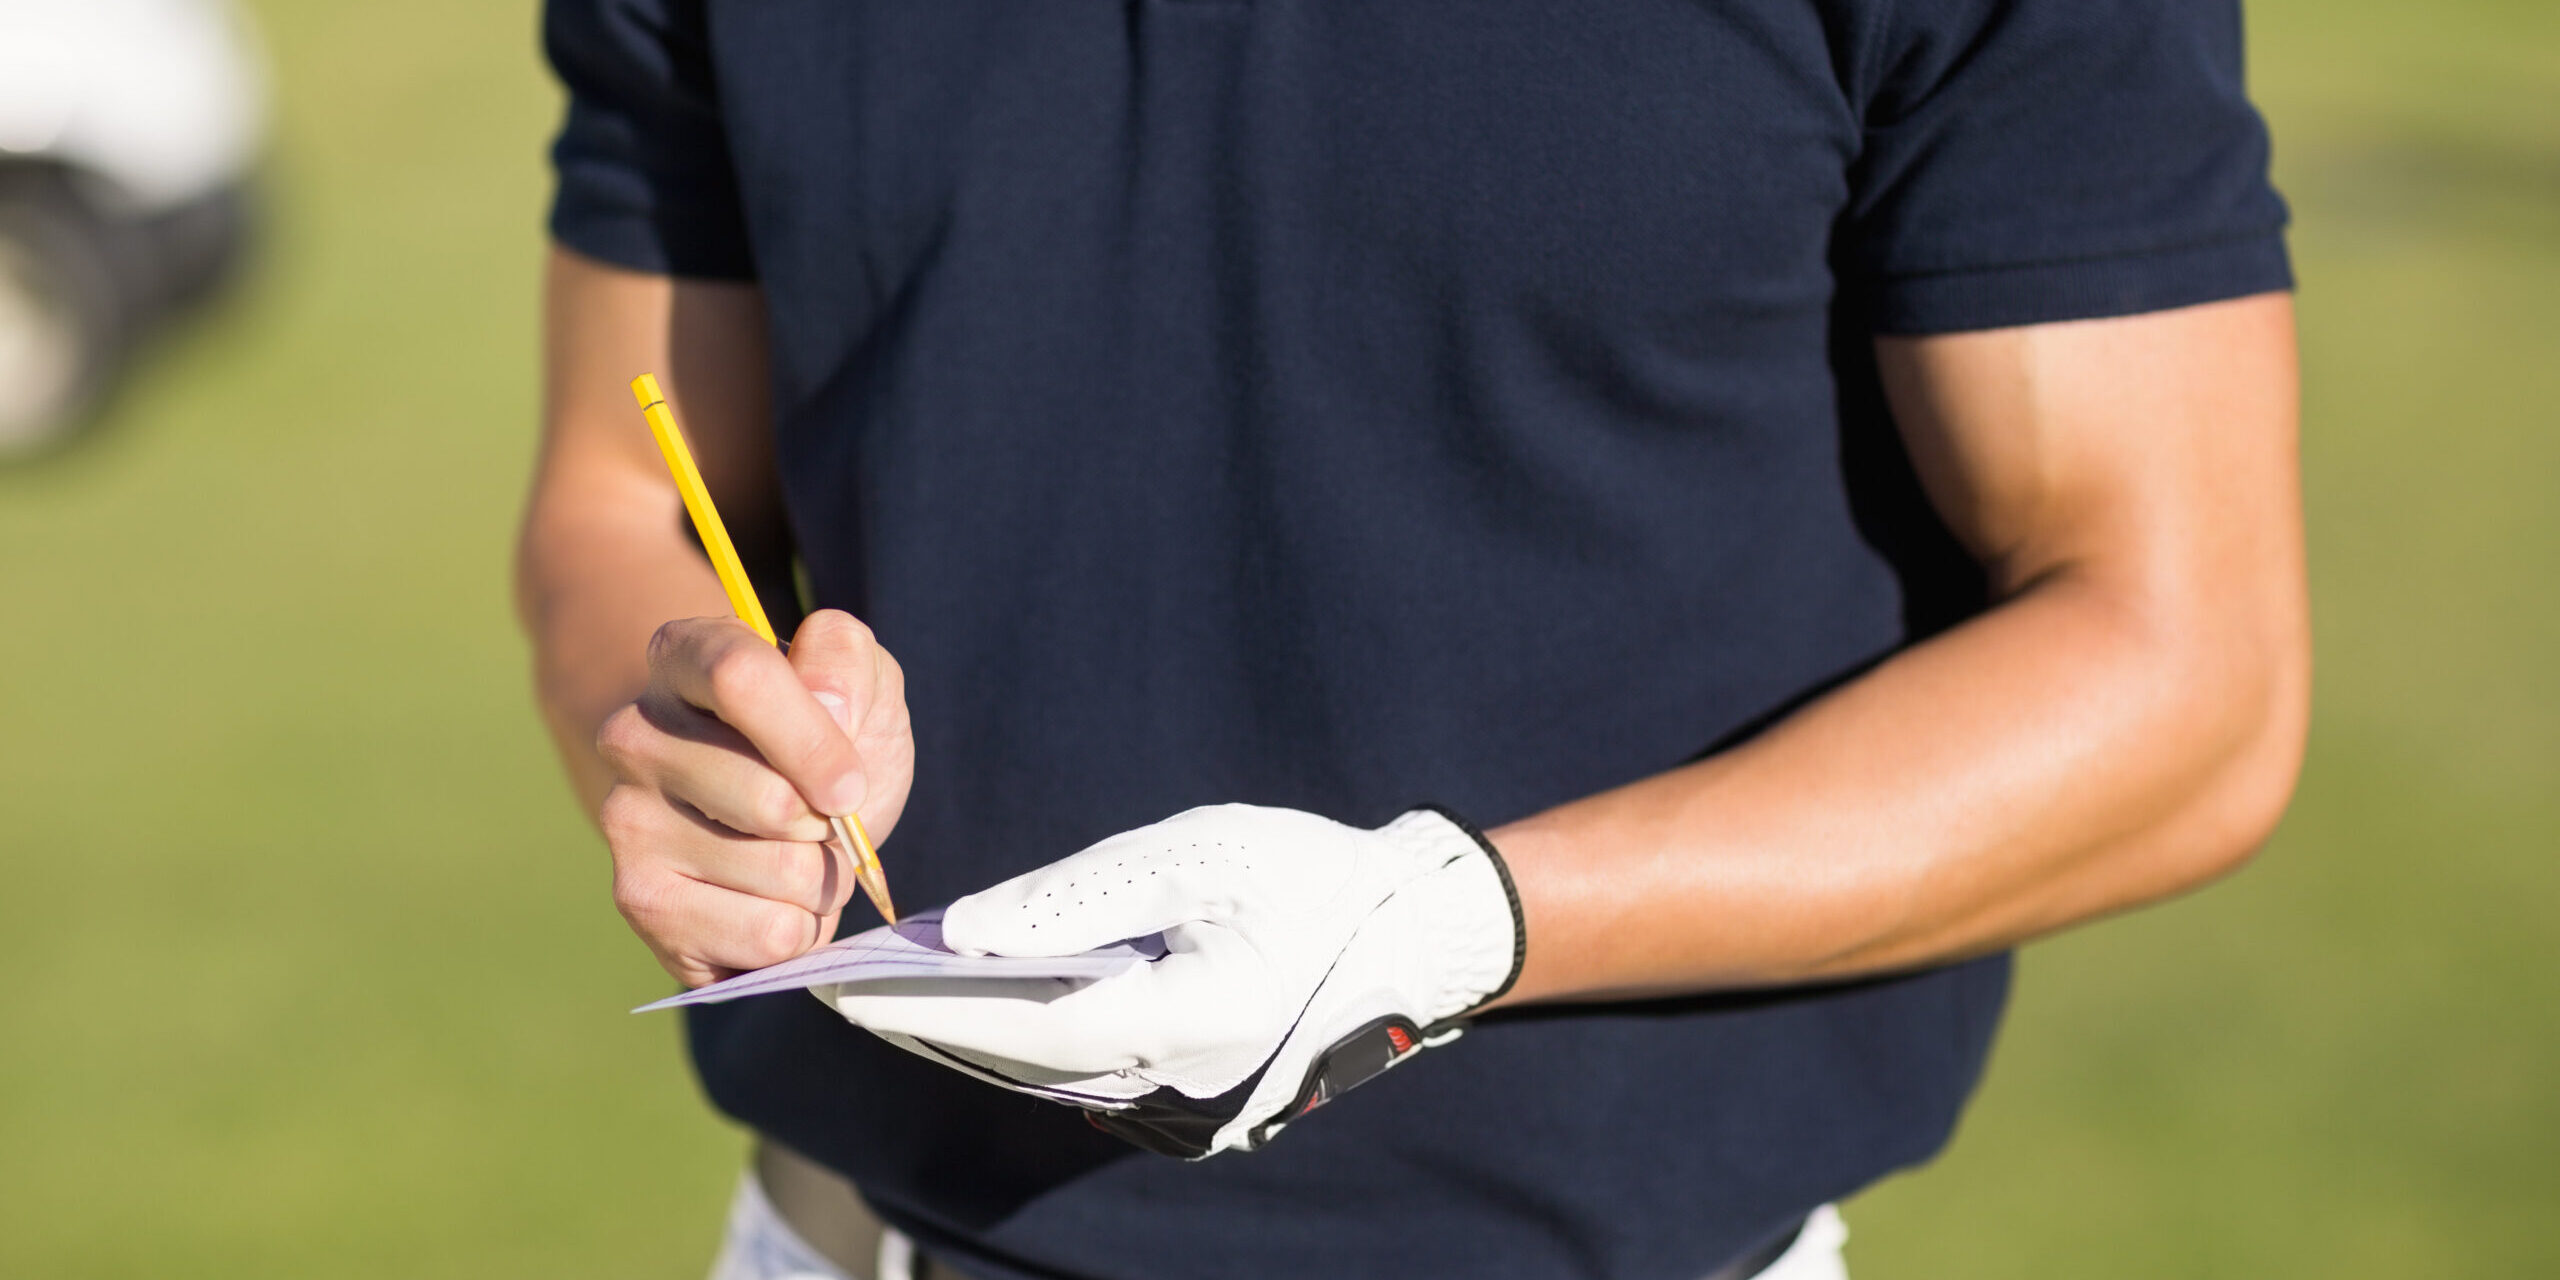 Midsection,Of,Golfer,Writing,On,Score,Card,While,Standing,At